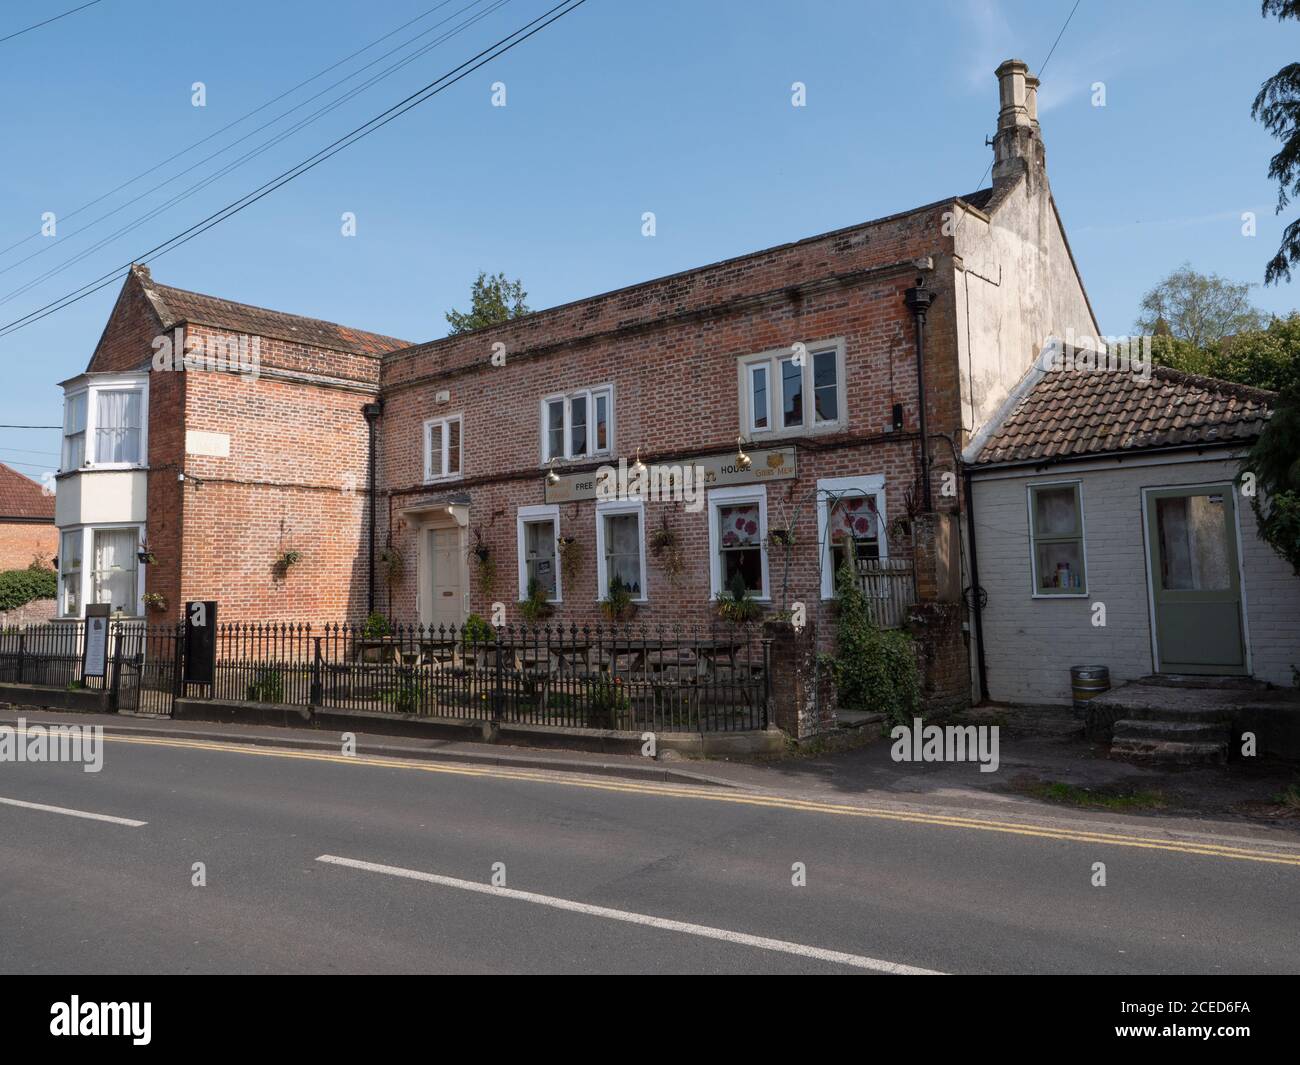 The Hollies Inn public house in Westbury Leigh, Wiltshire, UK. Stock Photo